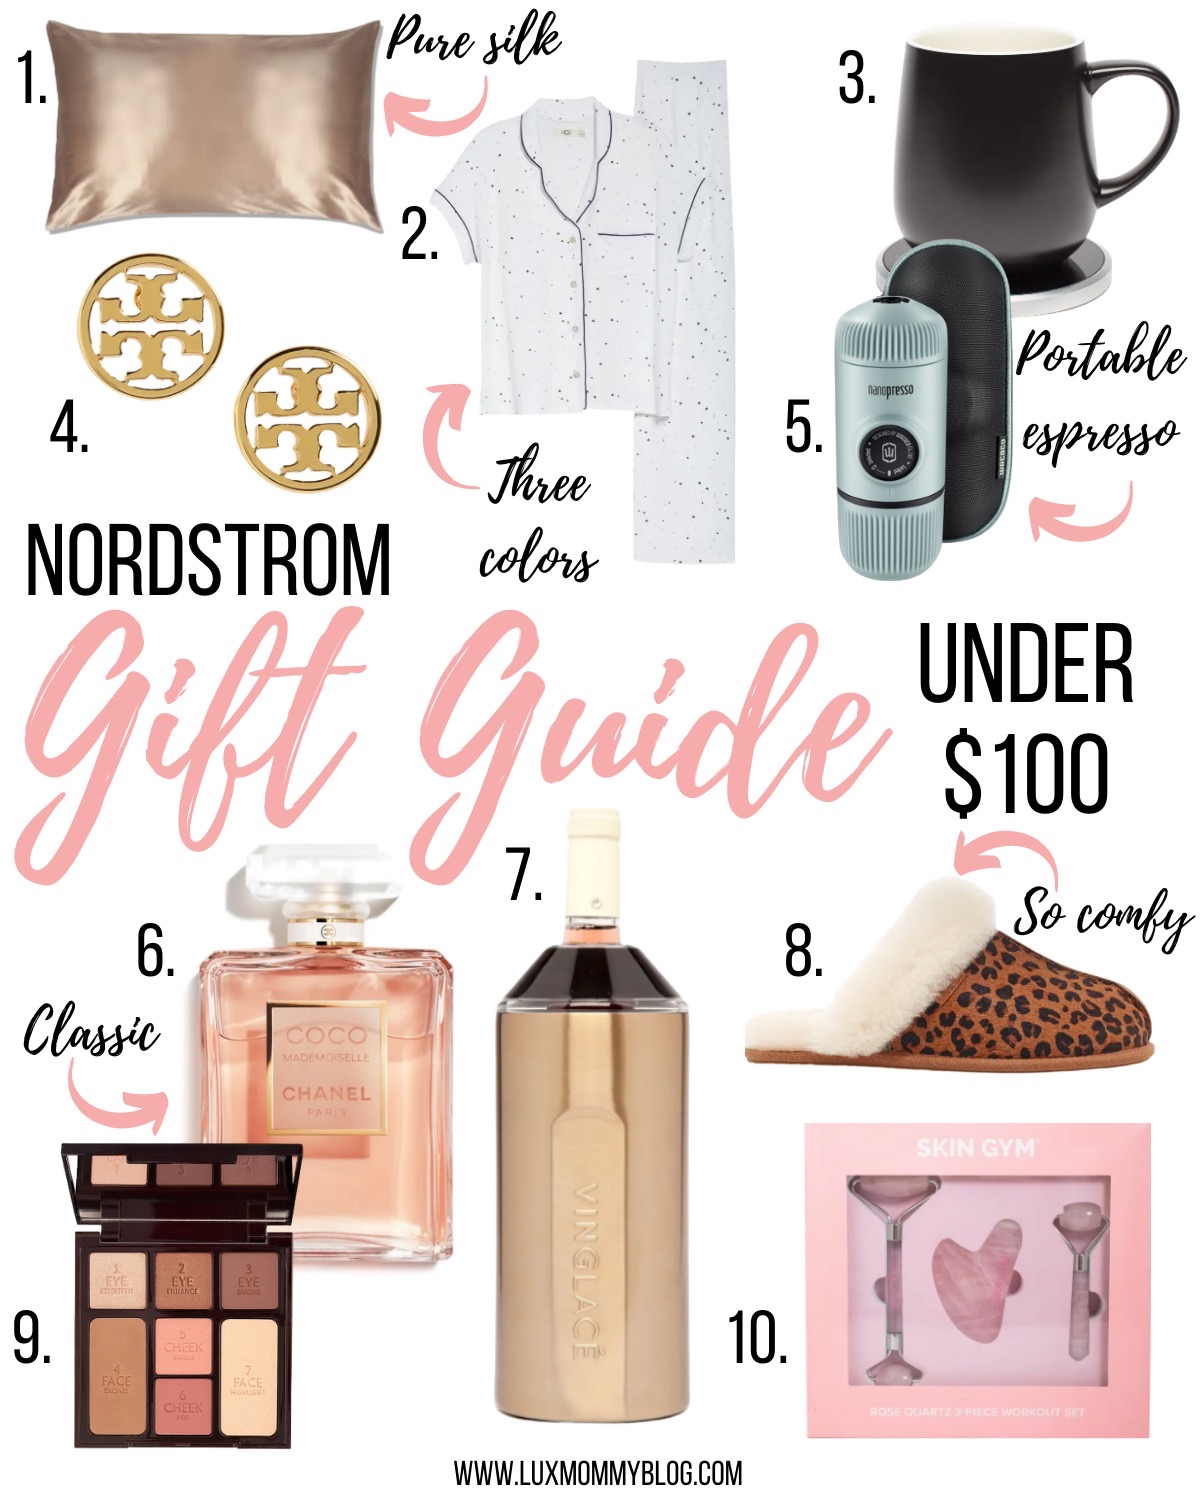 Nordstrom Gift Guide Under $25, $50 and $100, LuxMommy